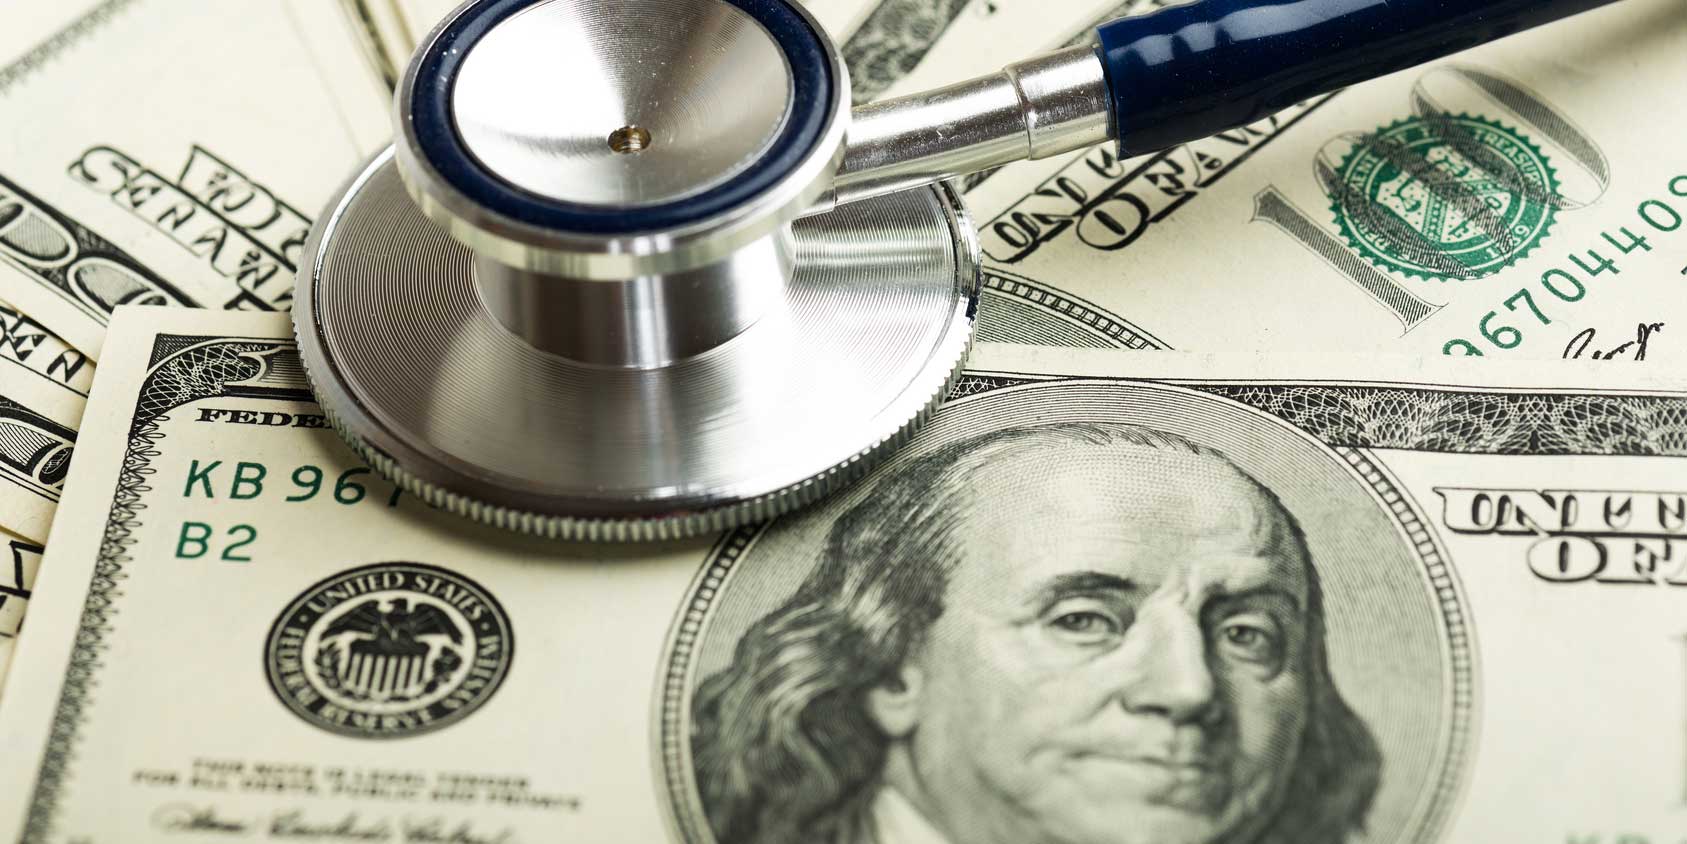 Healthcare Price Transparency Gets a Boost